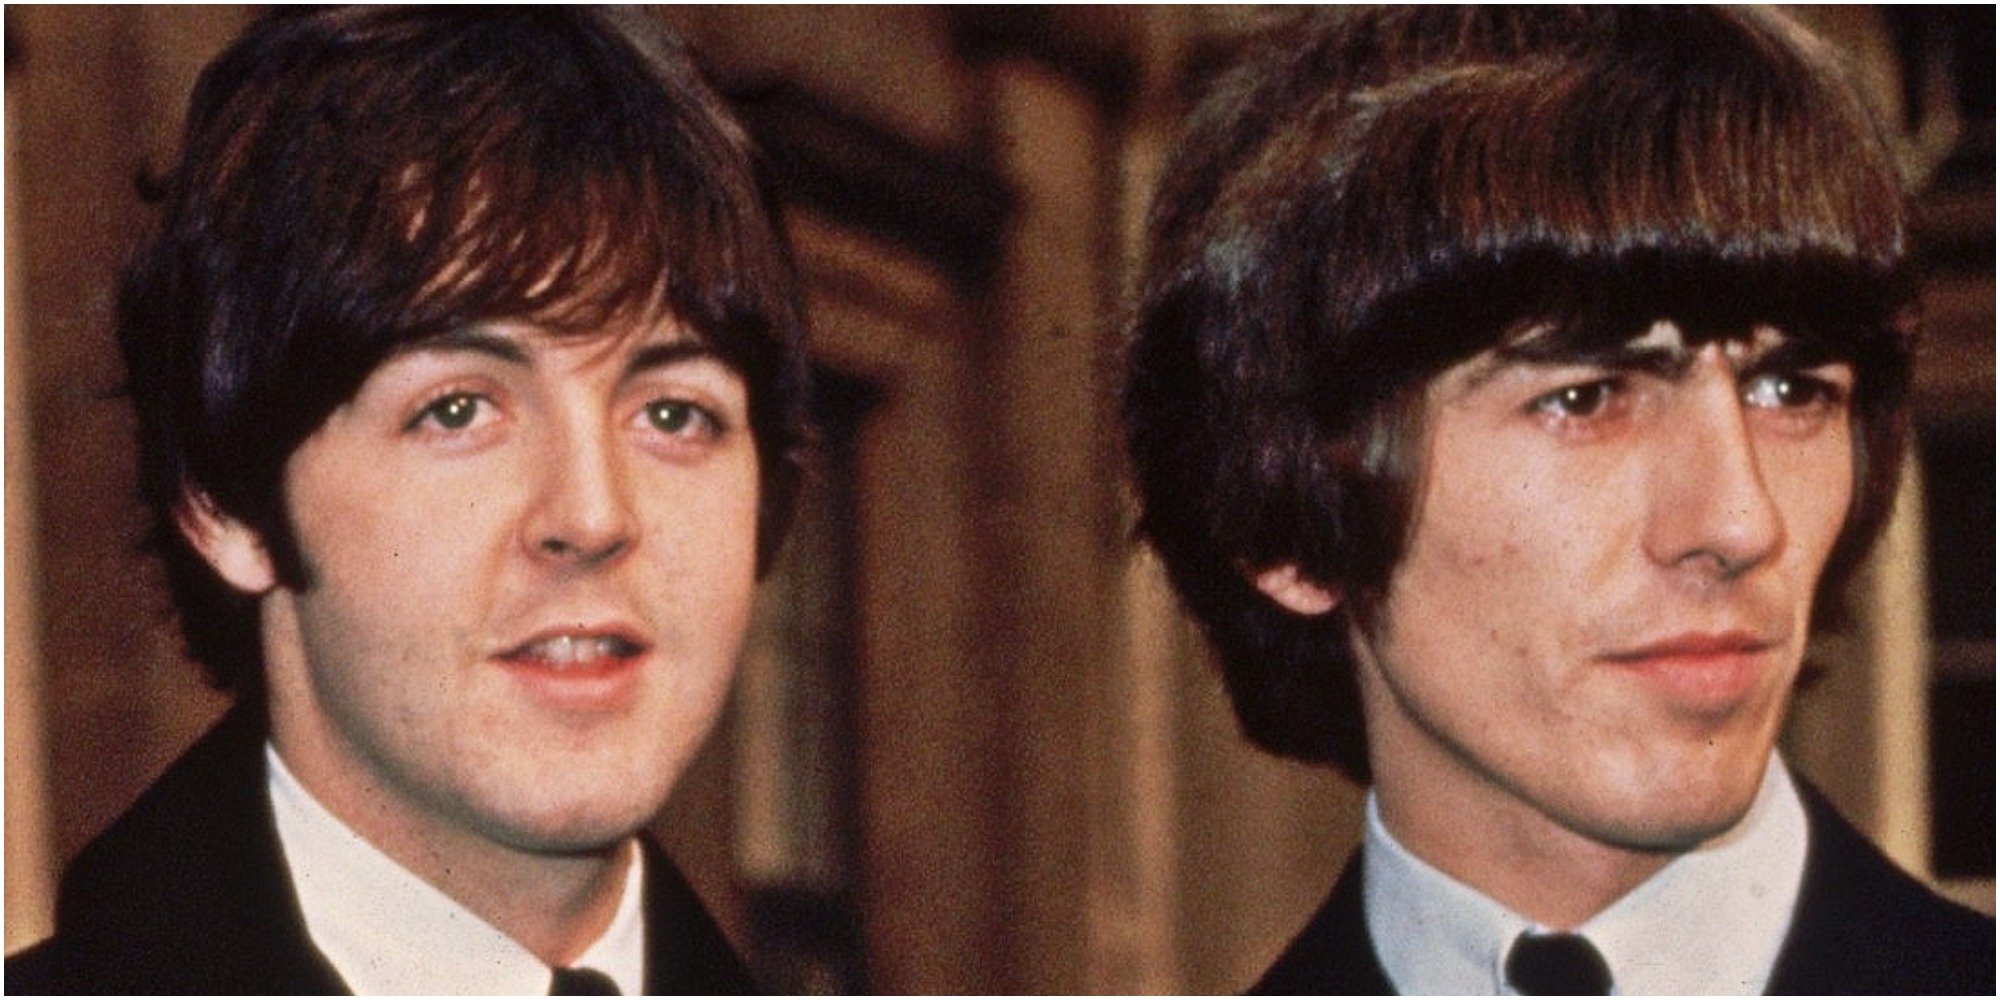 Paul McCartney and George Harrison receive their MBE Awards.